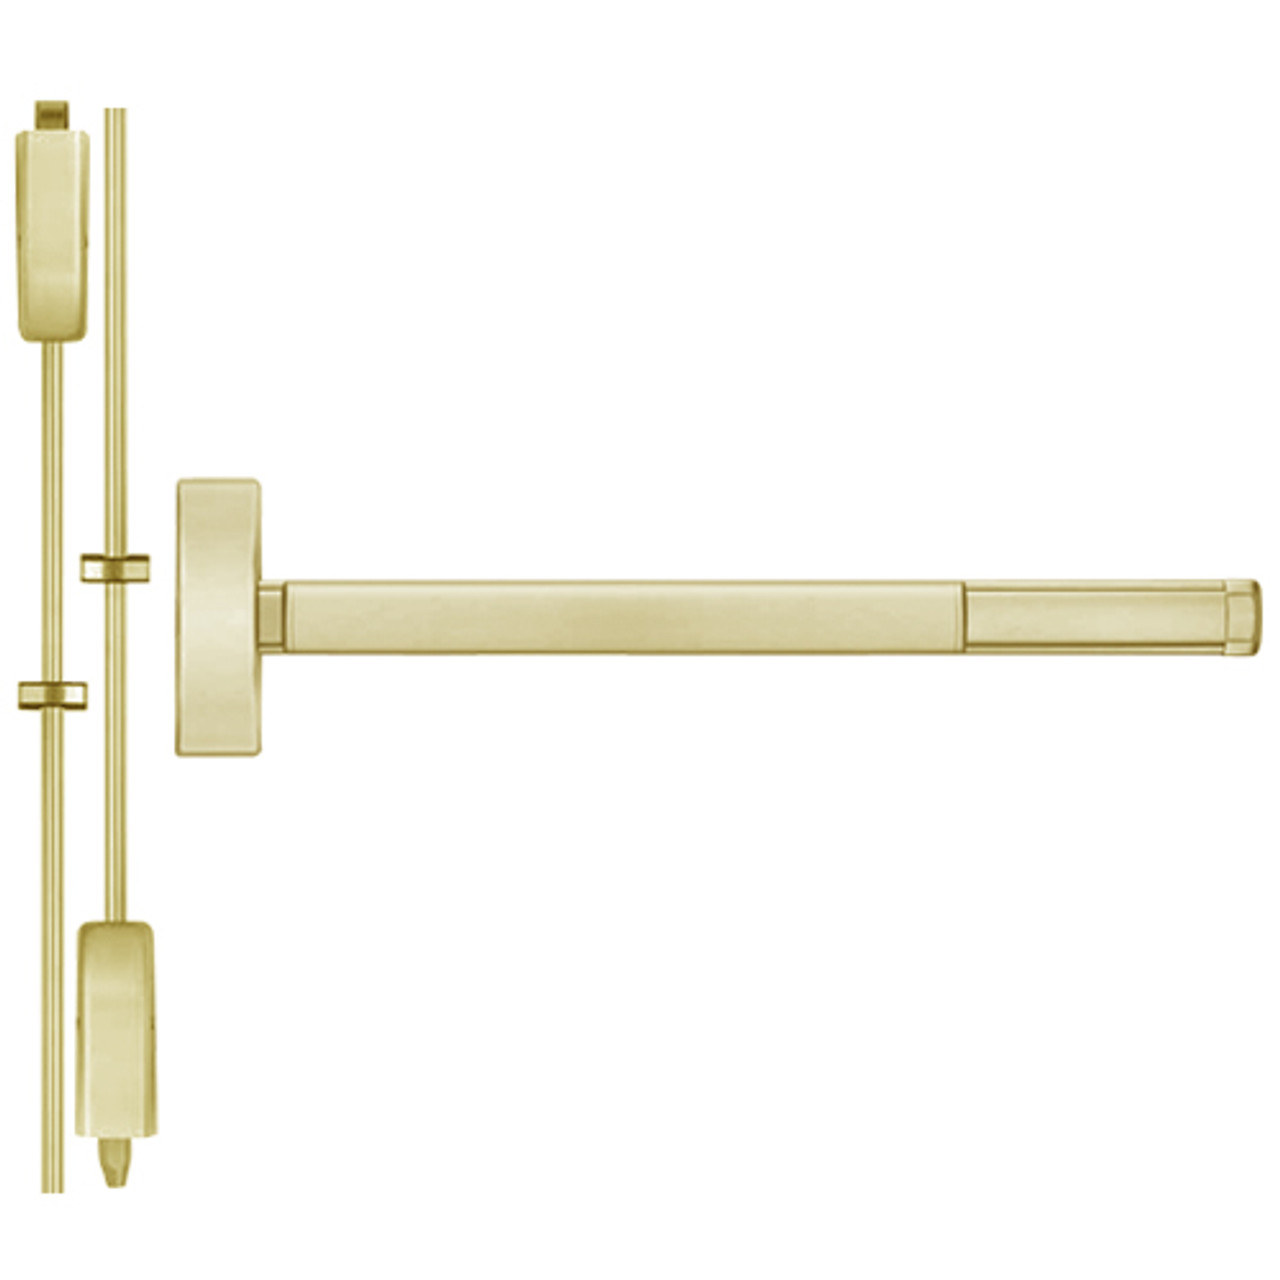 TSFL2201LBR-606-36 PHI 2200 Series Apex Surface Vertical Rod Device with Touchbar Monitoring Switch Prepped for Cover Plate in Satin Brass Finish